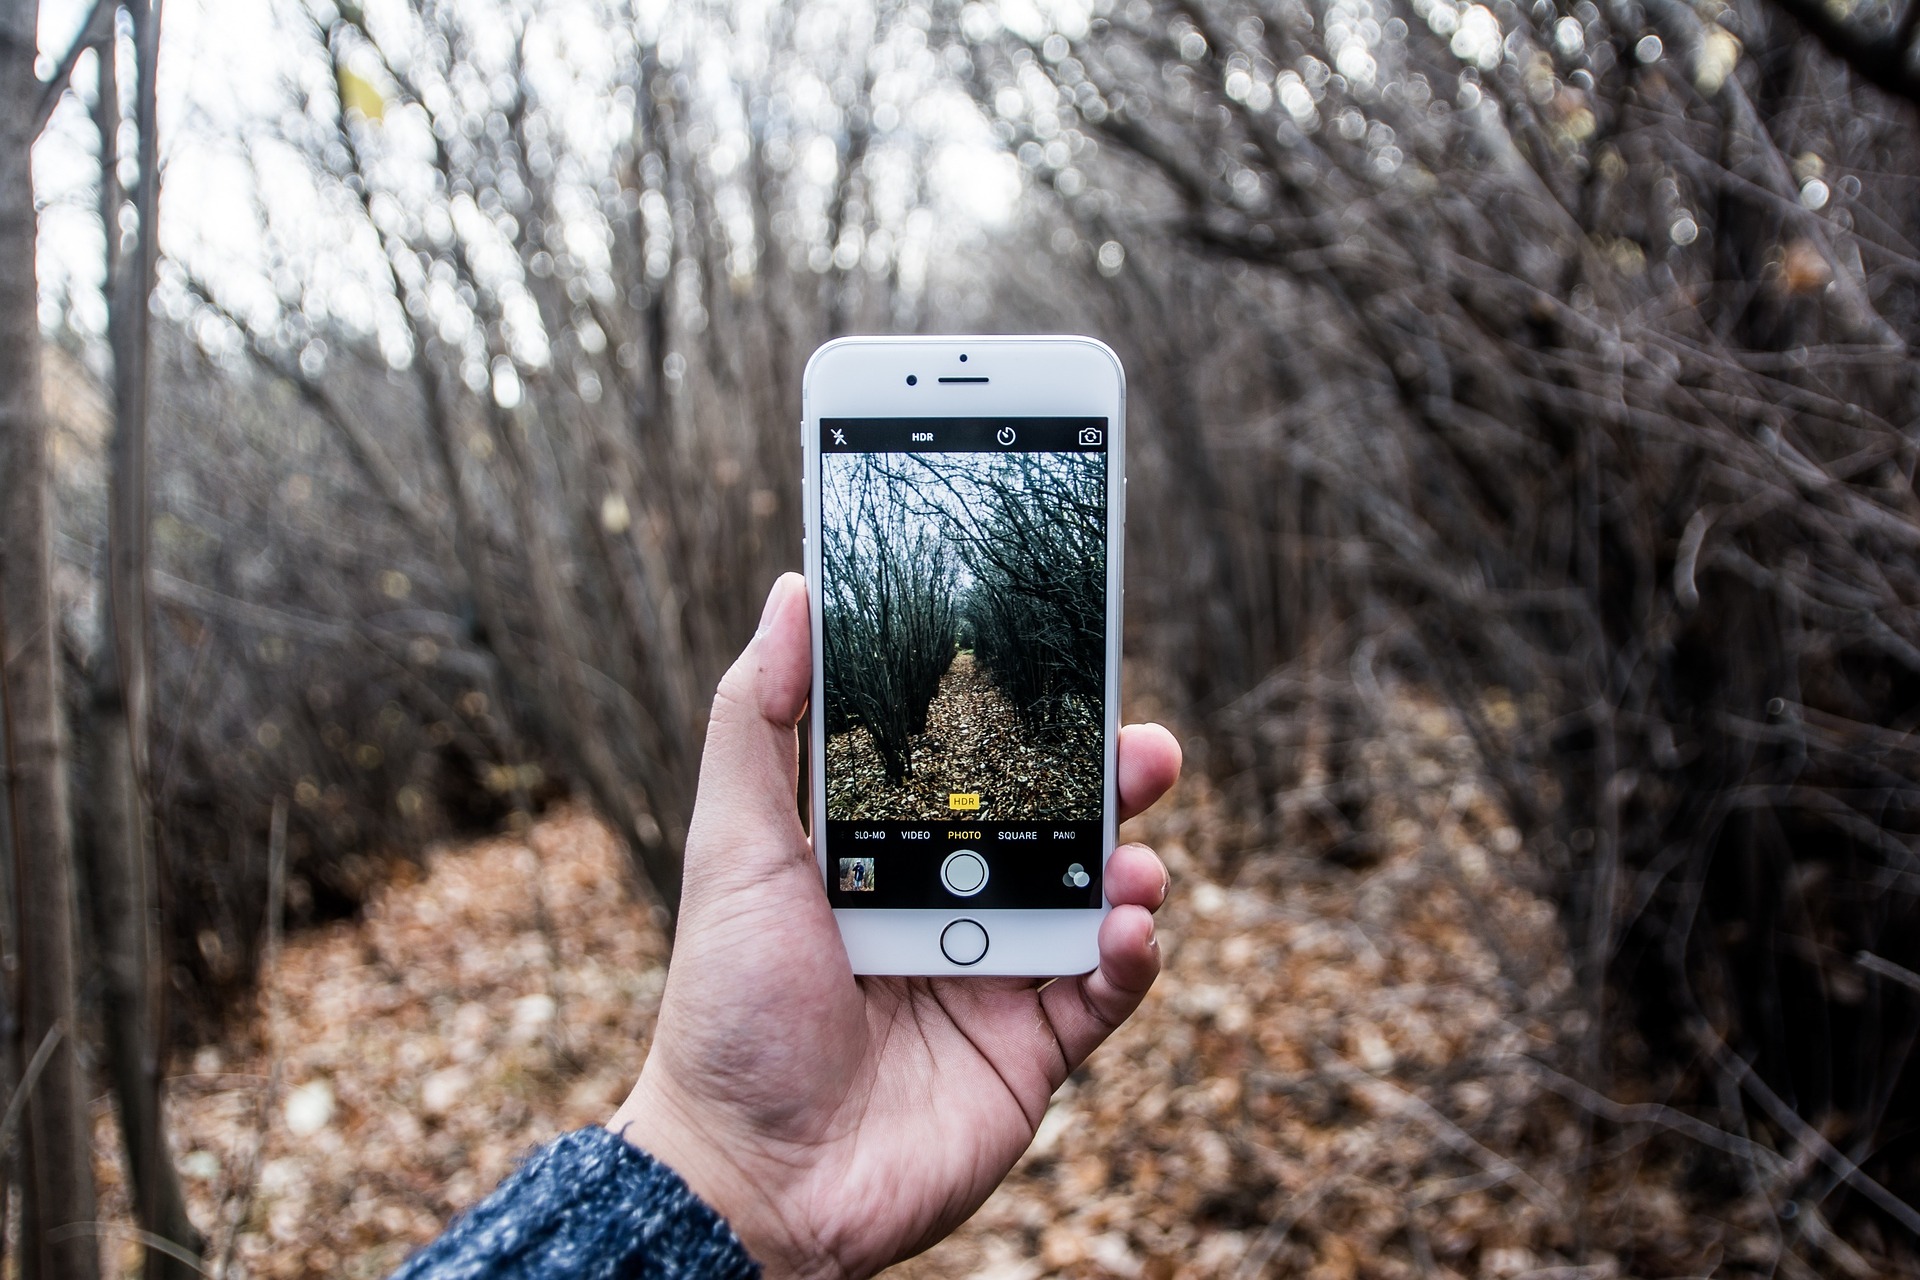 A hand holds up a smartphone with the camera app open while in the woods, capturing the woods.